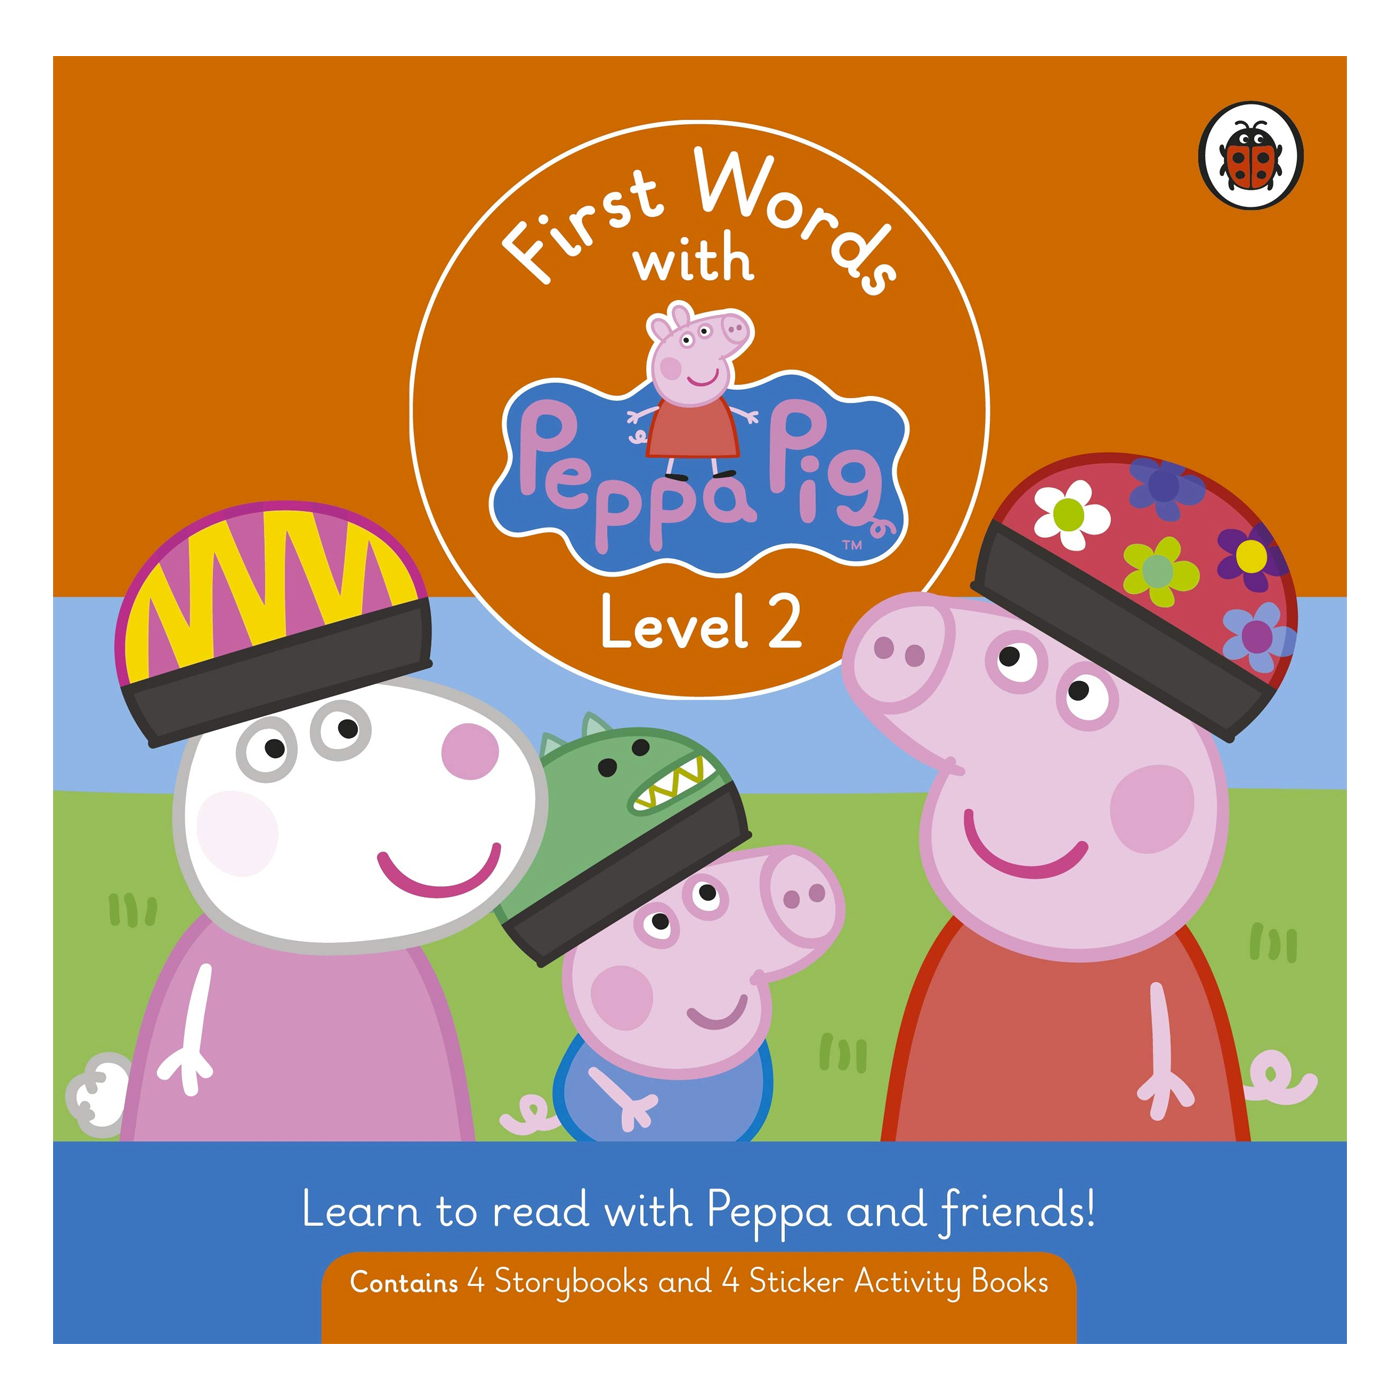 LADYBIRD First Words With Peppa Pig Level 2